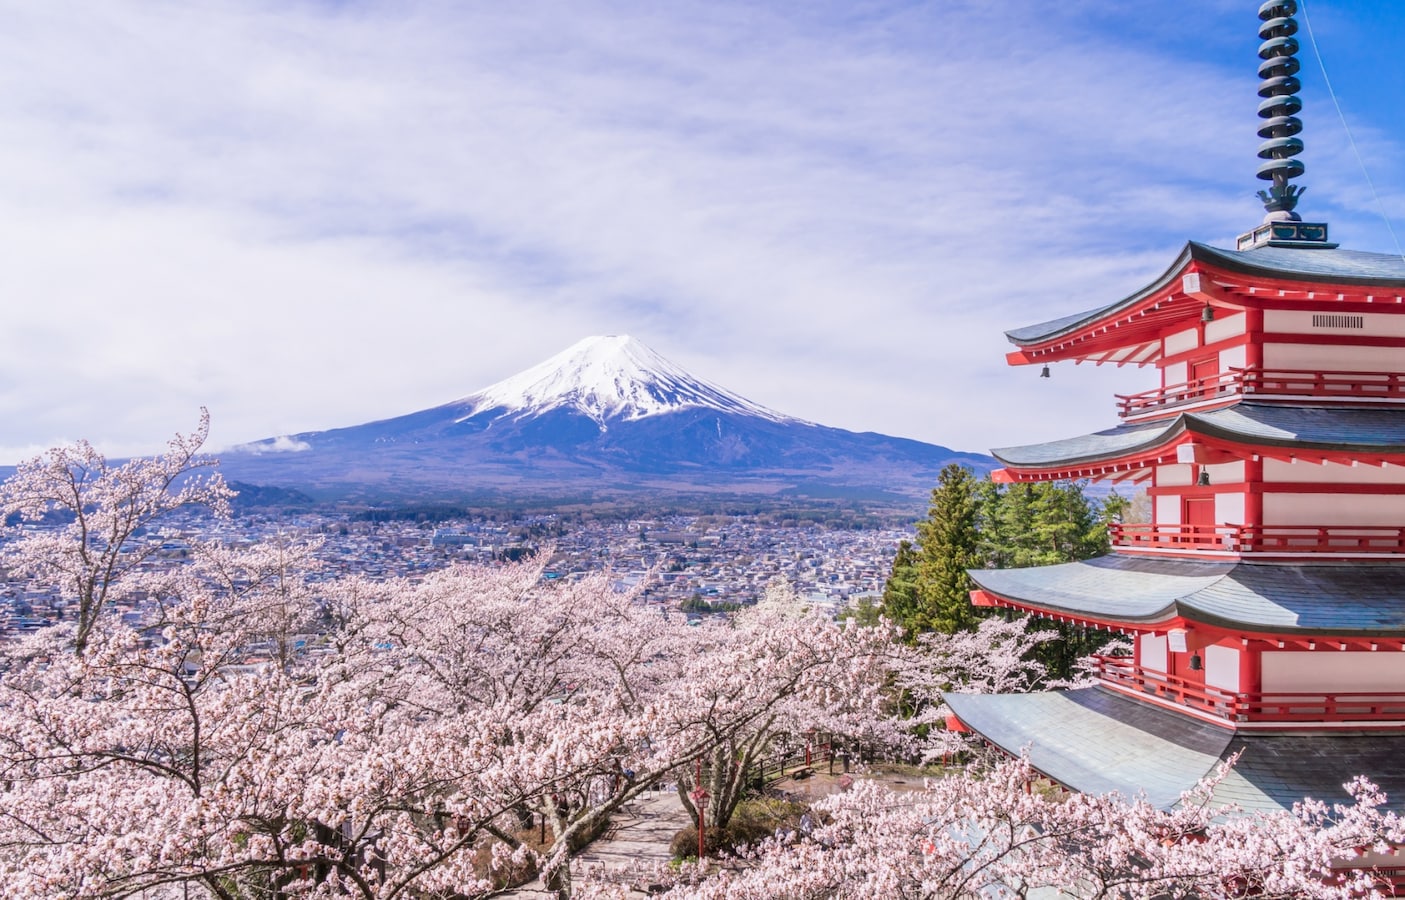 The Shrine with the Best View of Mount Fuji